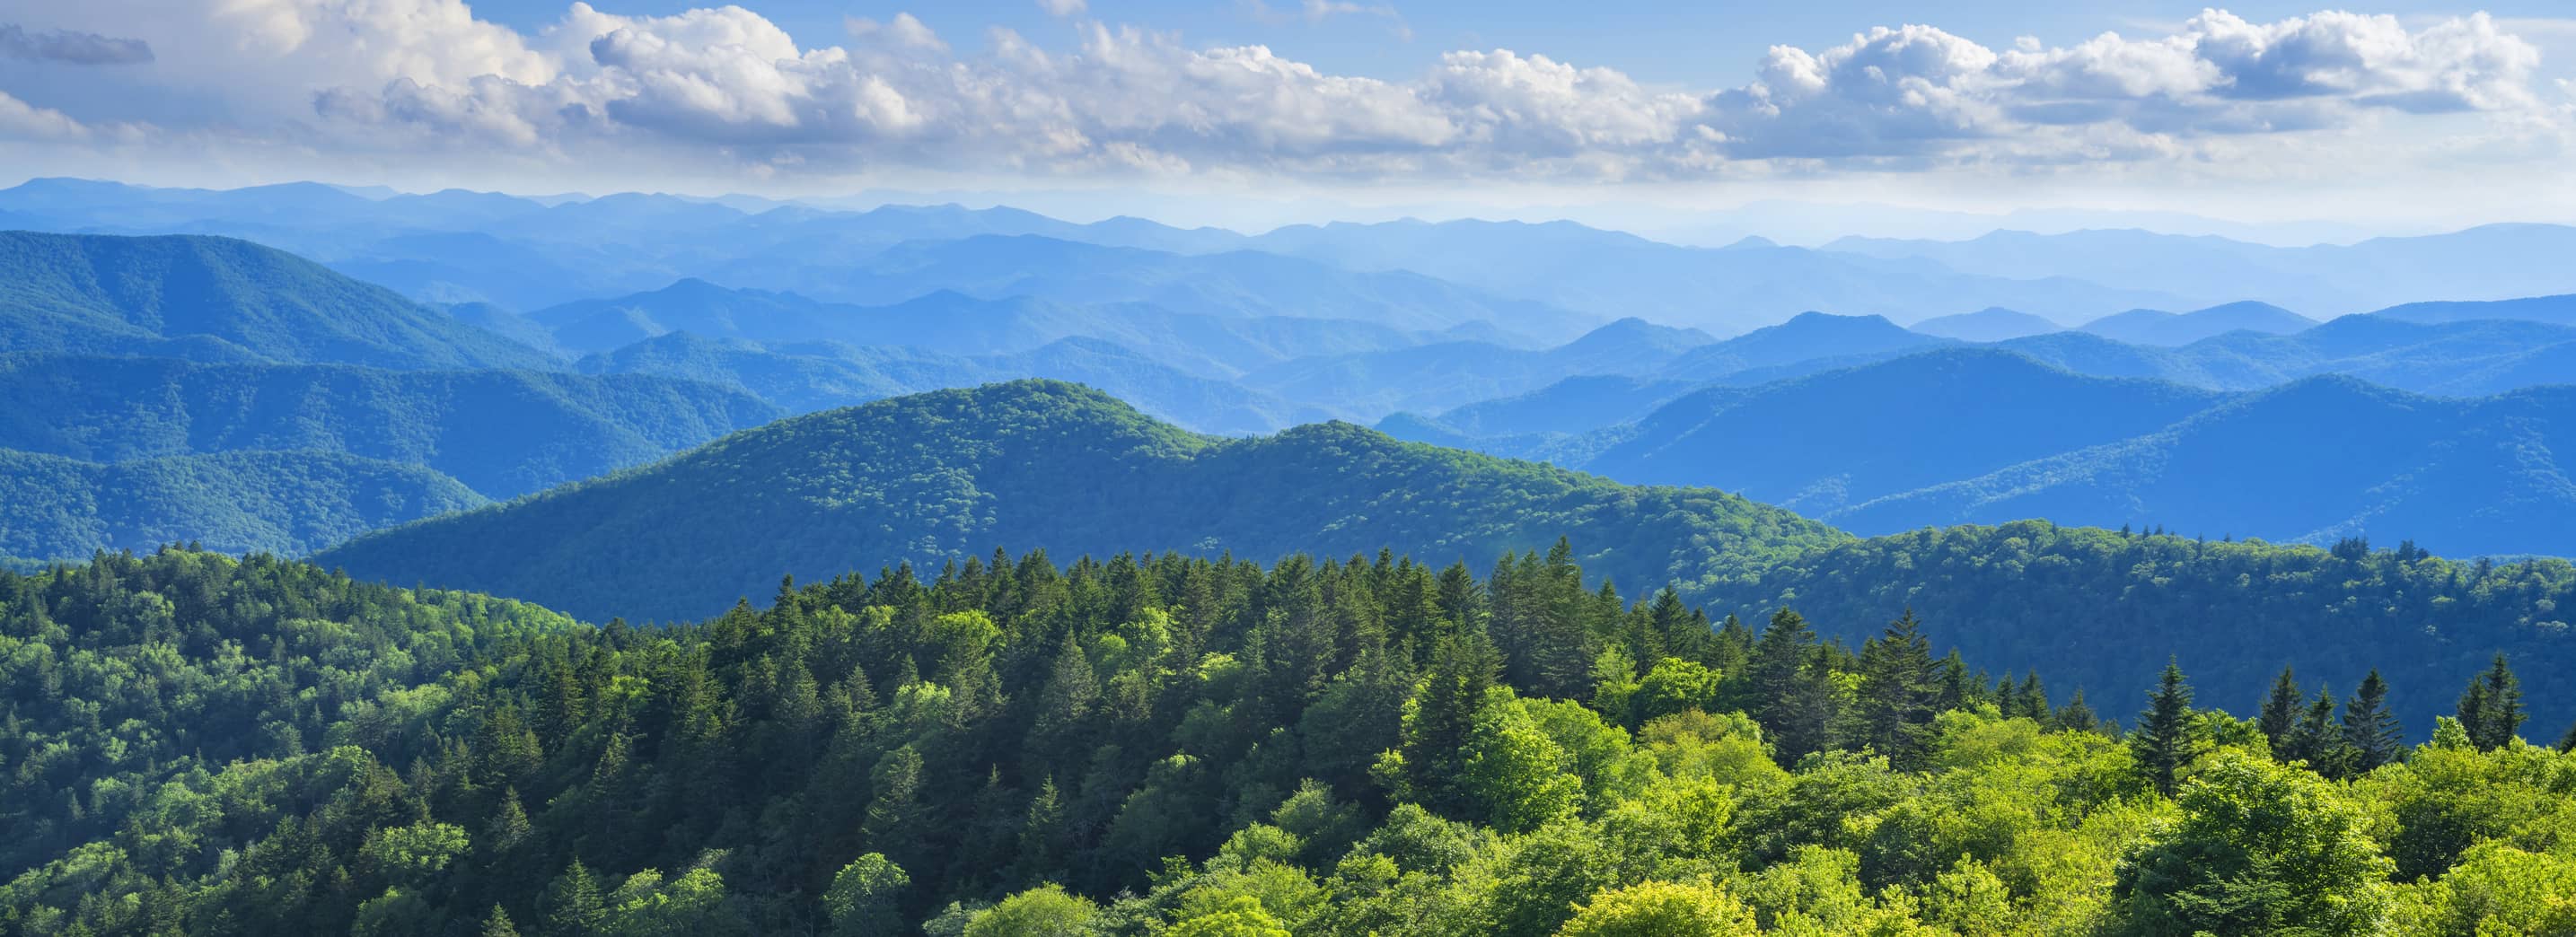 A panoramic view of the Smoky Mountains from the Blue Ridge Parkway.